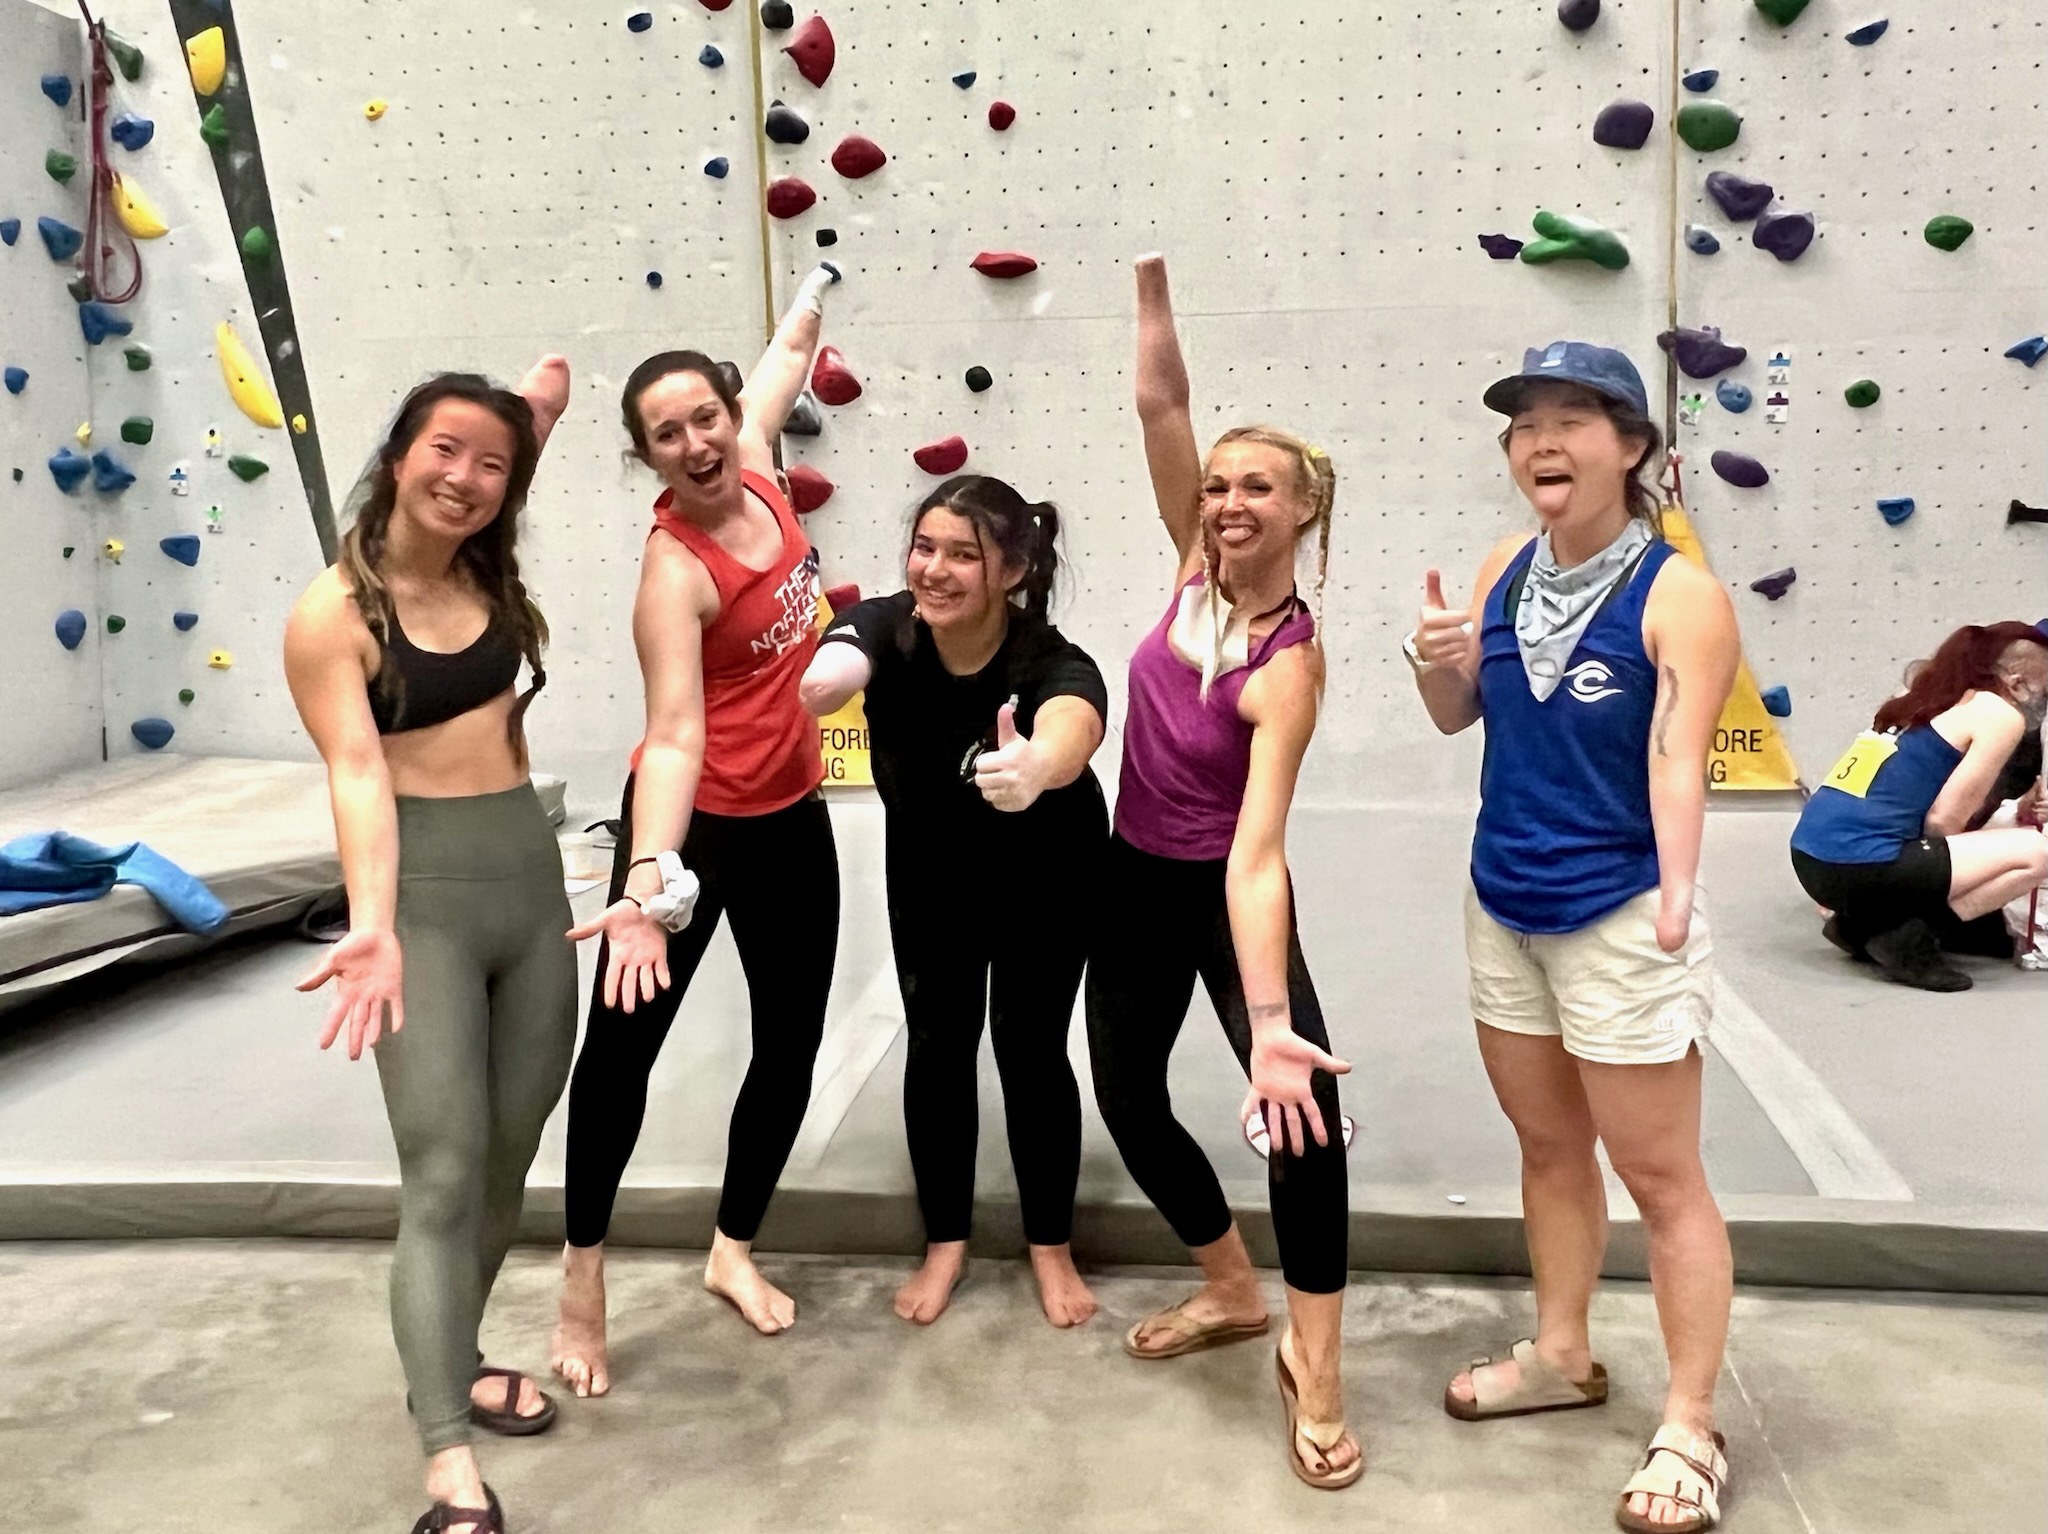 AAF recipient, Grace, standing with 4 friends (inlucding Mo) at the Paraclimbing Nationals